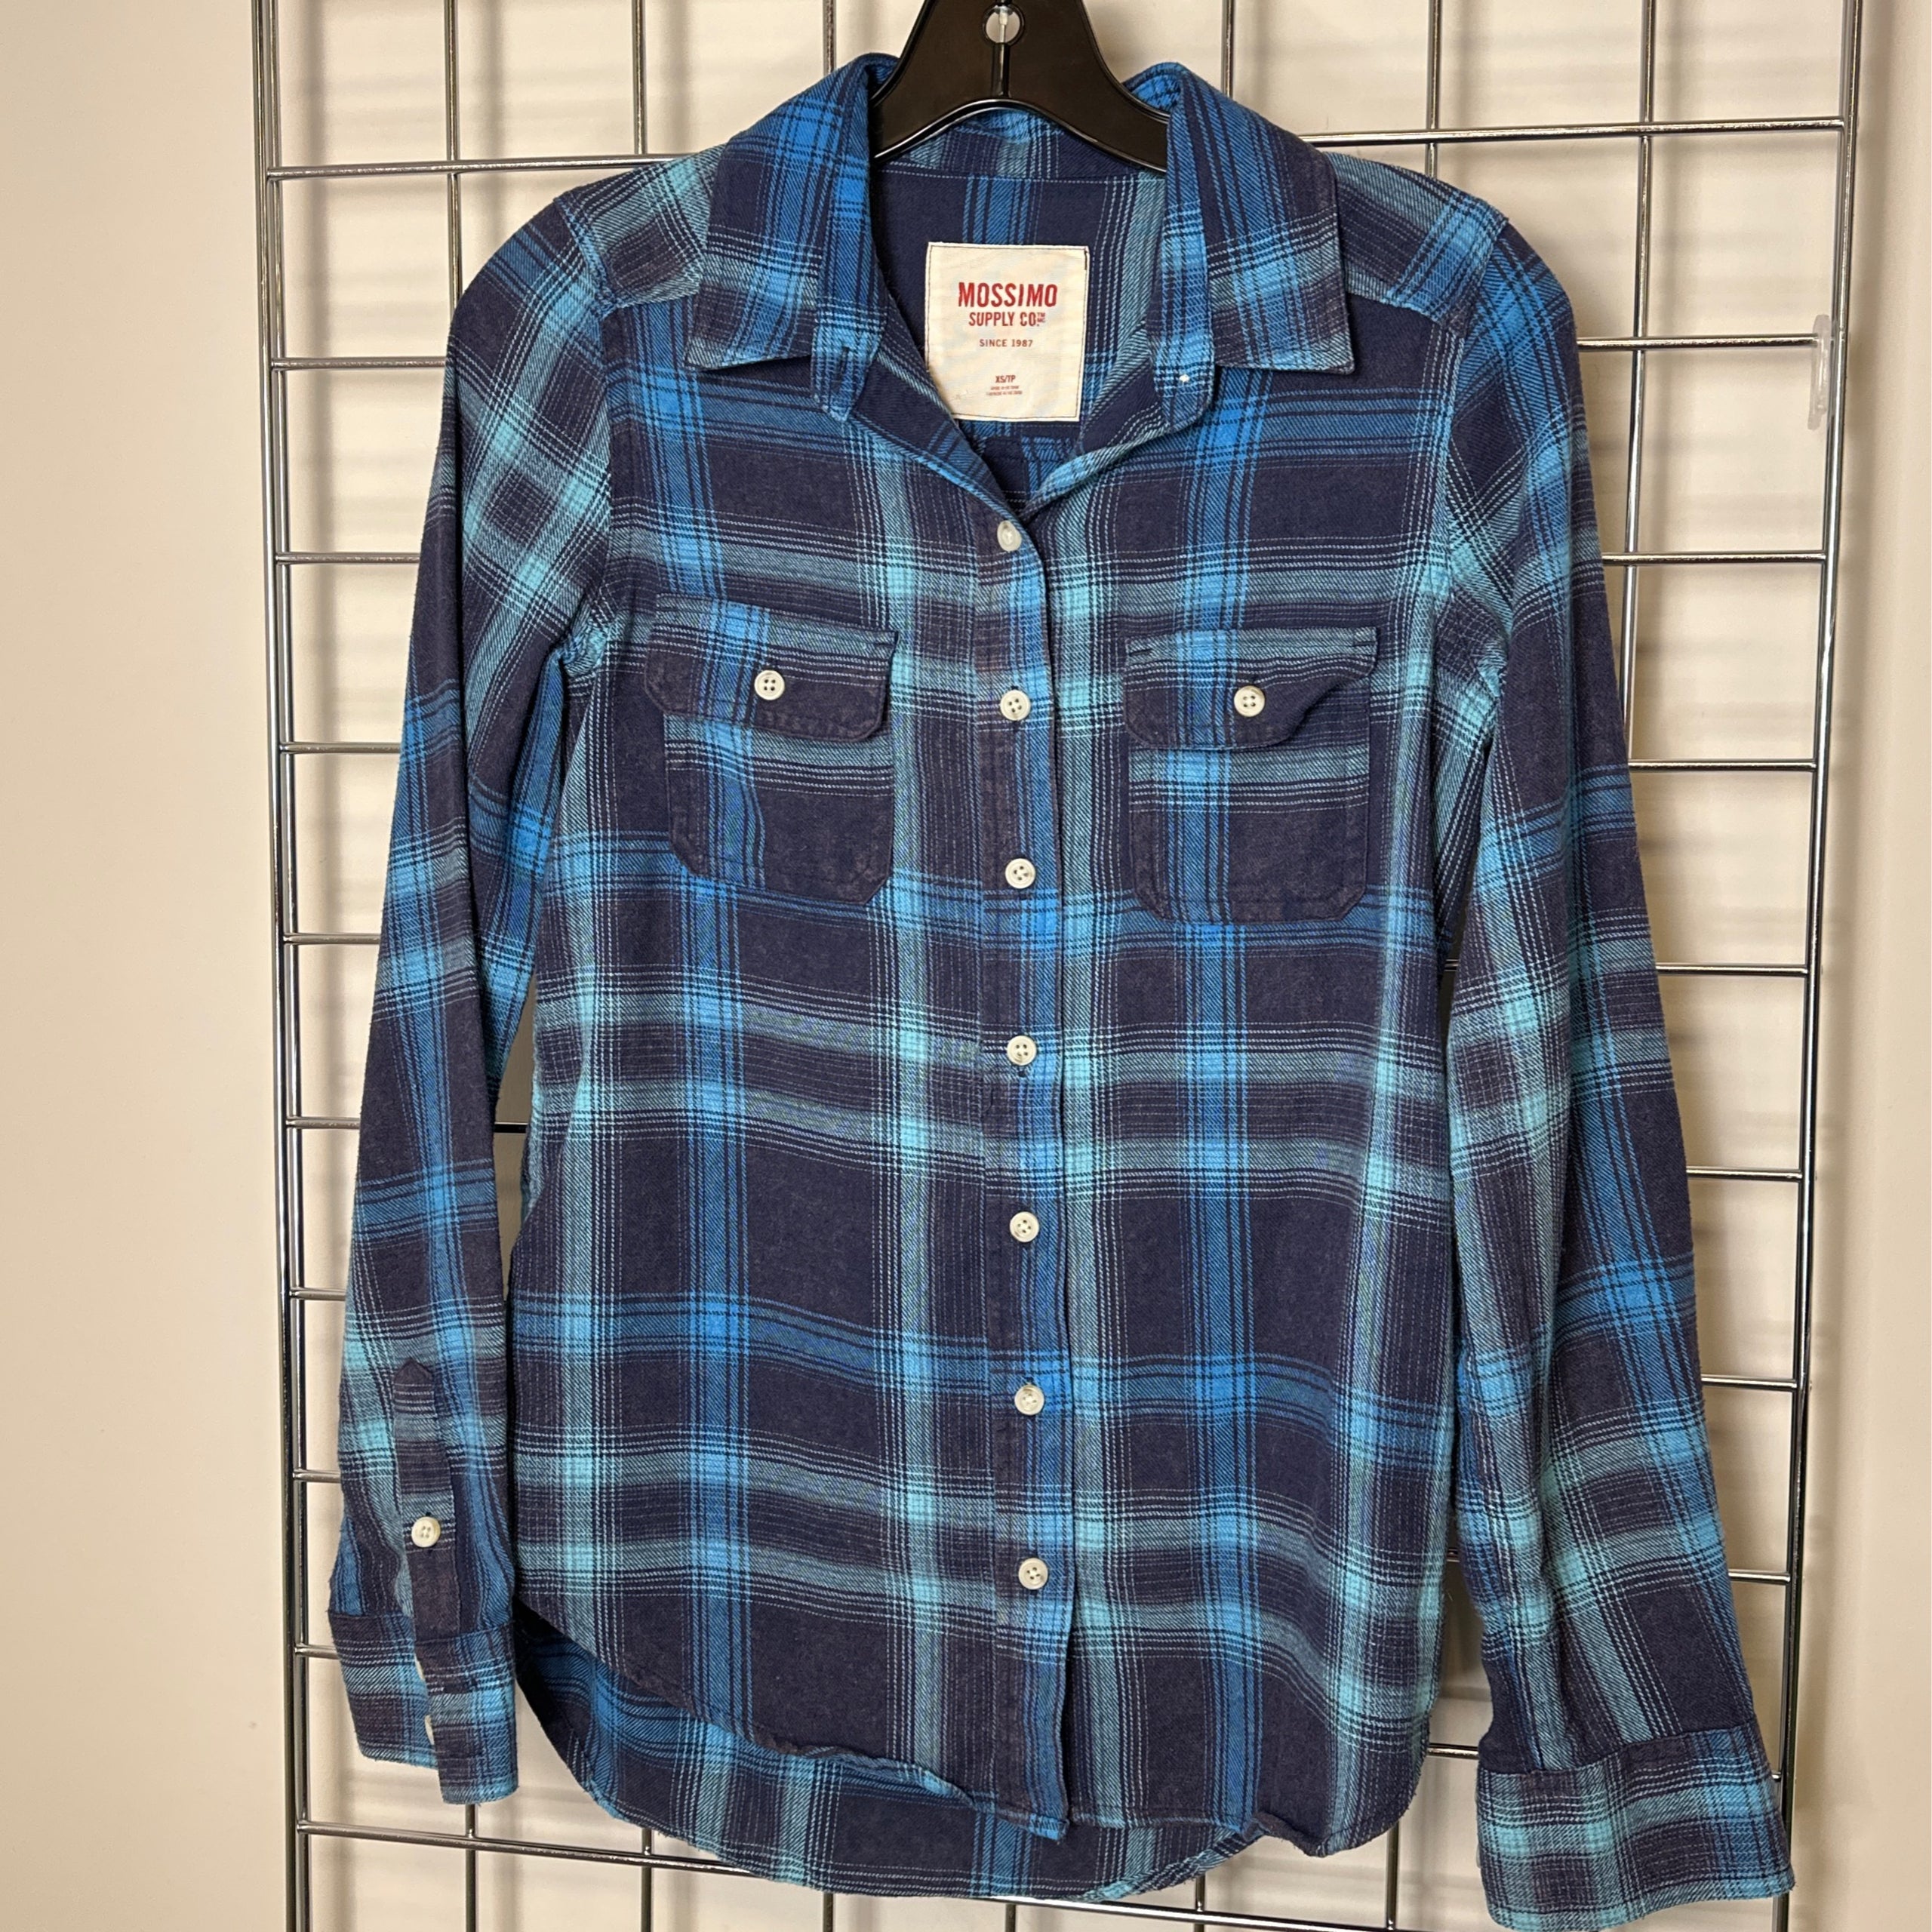 154412254 - Sz XS Blue Flannel - Mossimo - Womens Long Sleeve Tops